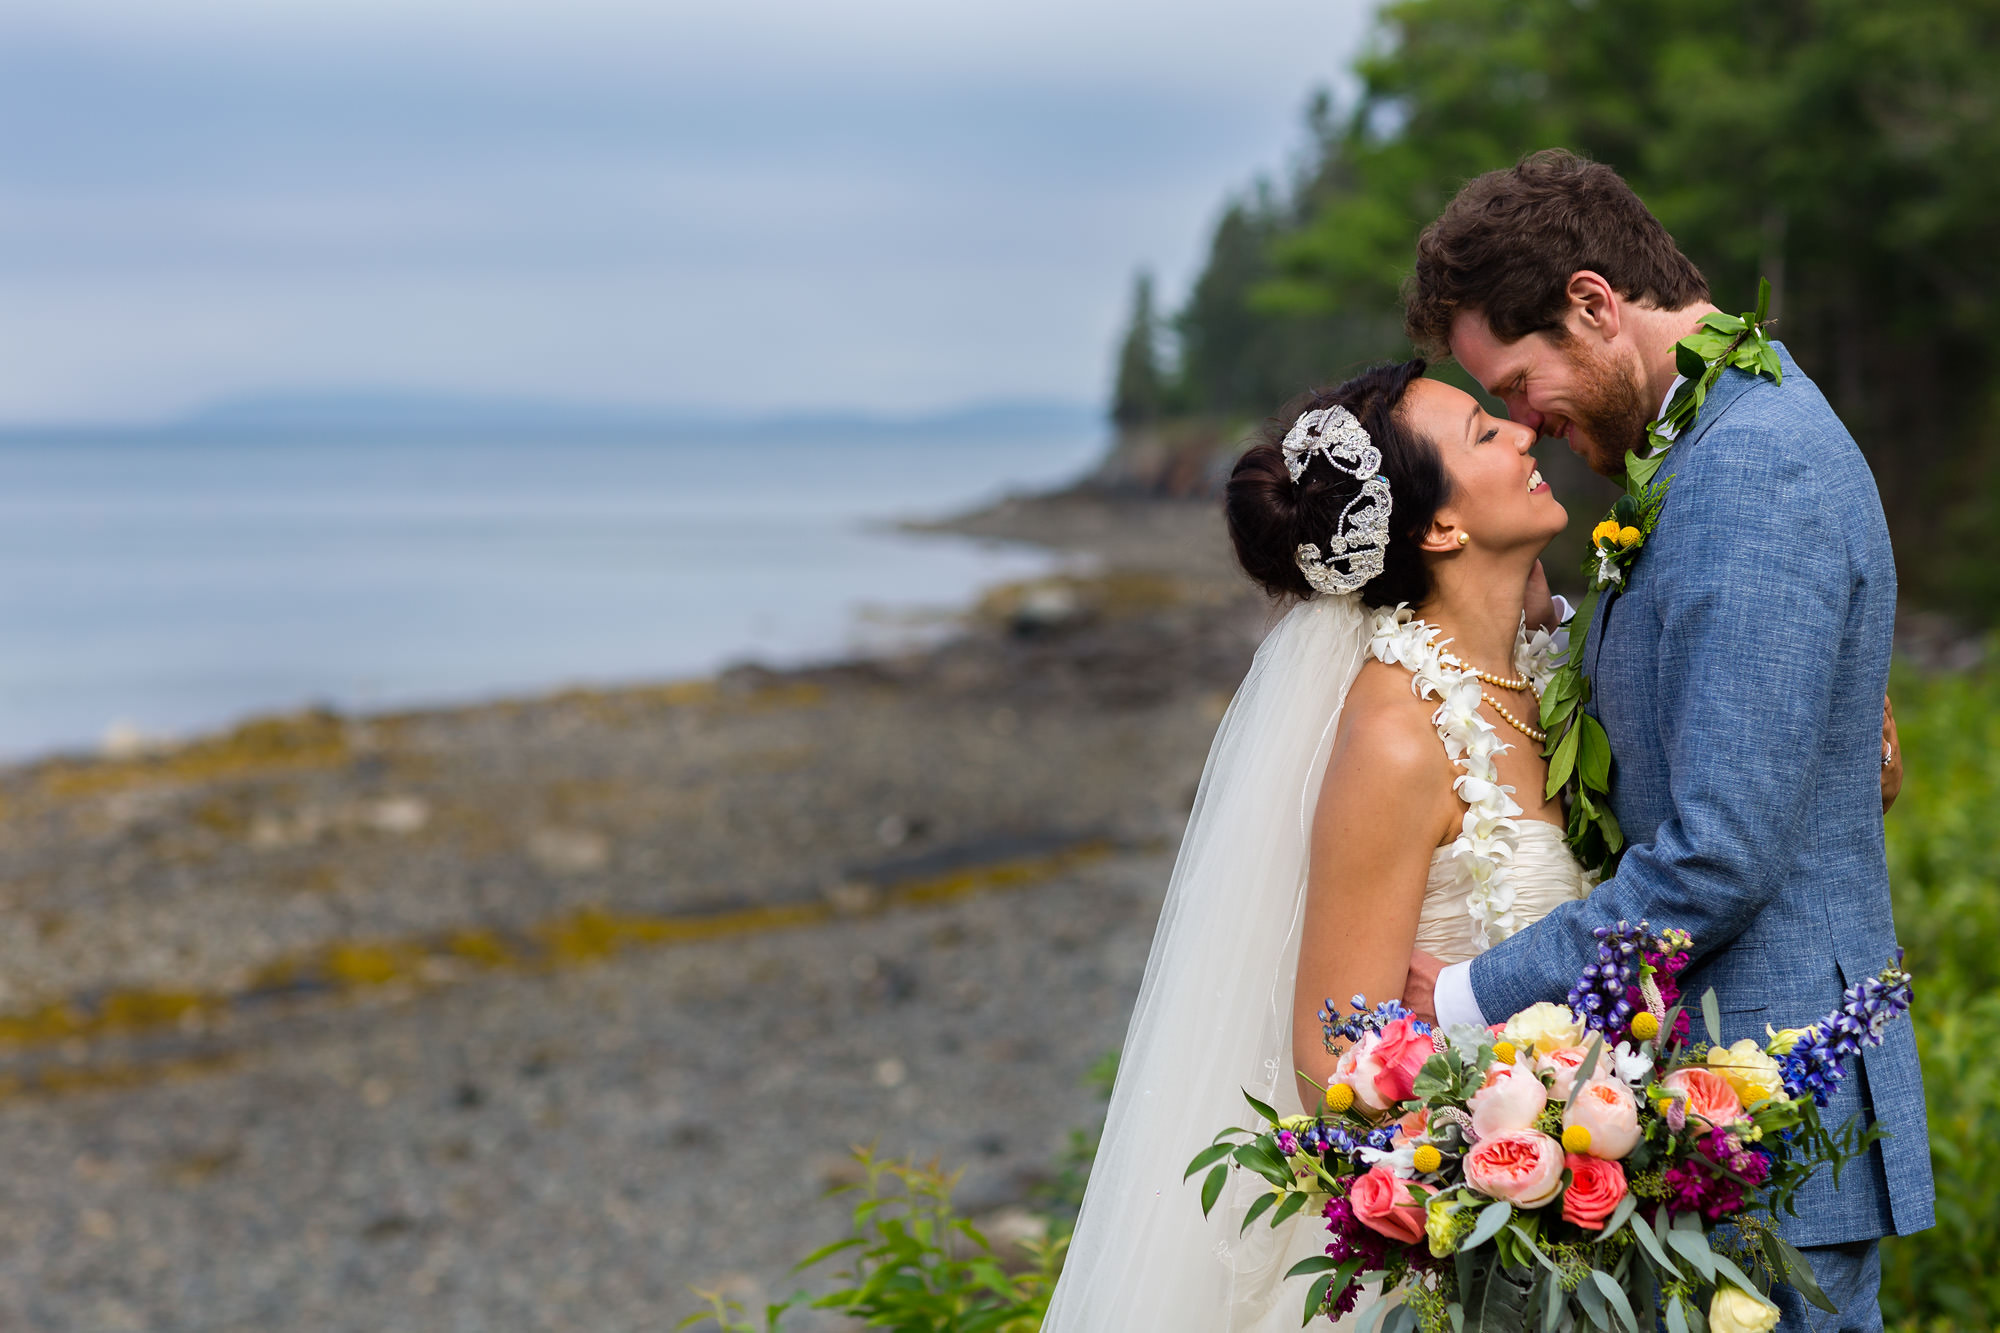 Wedding portraits at the Pot and Kettle Club in Bar Harbor Maine